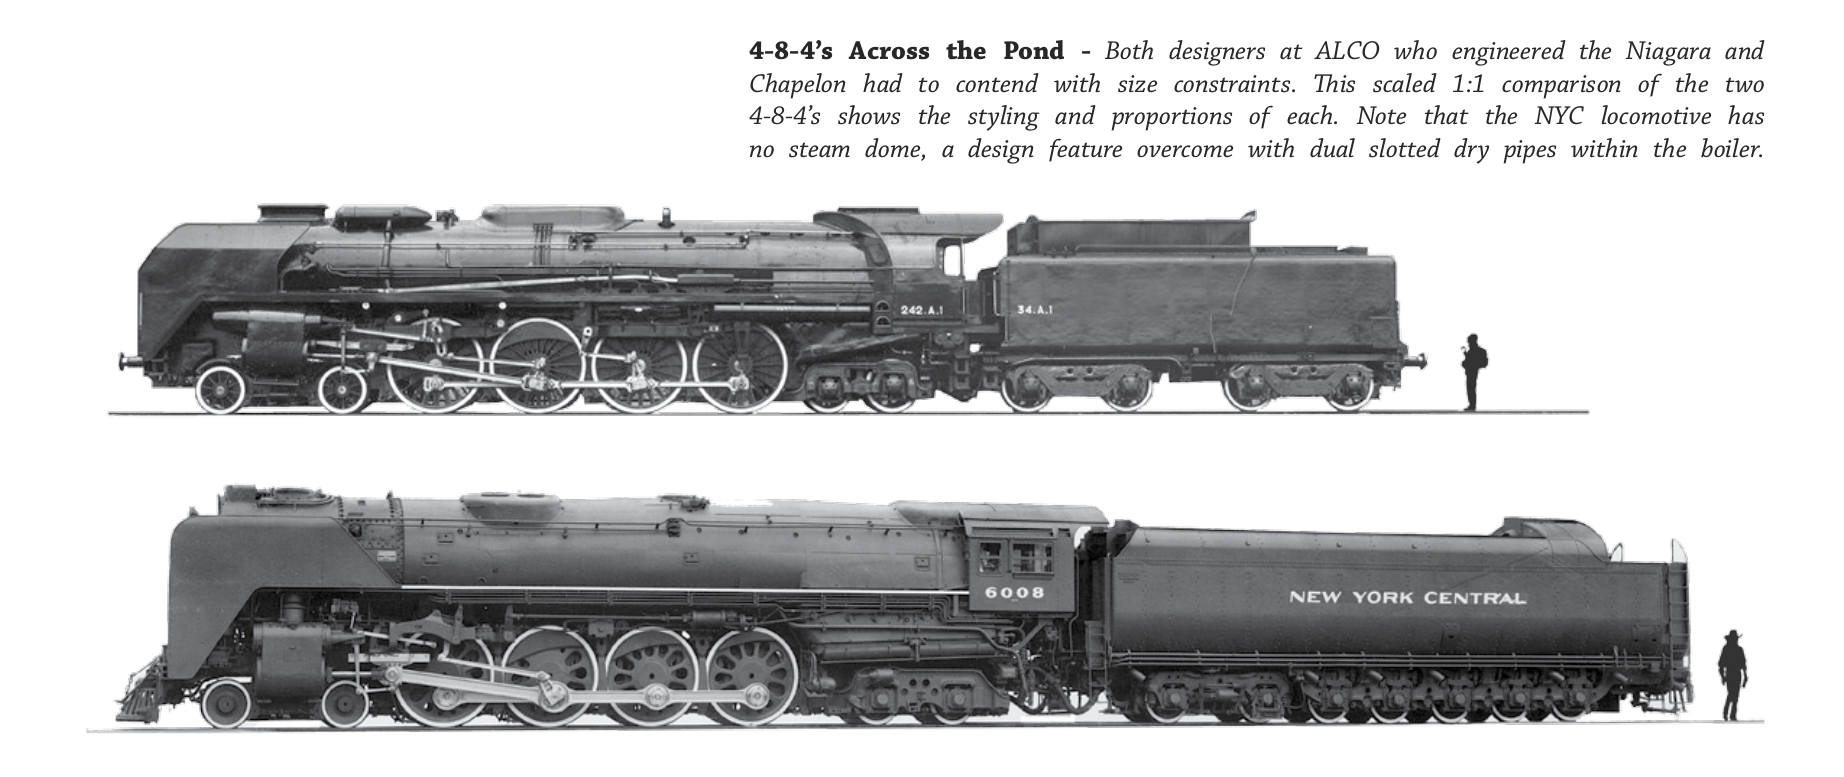 Paul Keifer was the only American designer to incorporate some of André Chapelon's ideas into his design of the New York Central's S1 Niagara. This photo compares the S1 Niagara with André Chapelon's last locomotive the 242A1. (Picture courtesy Coalition for Sustainable Steam).